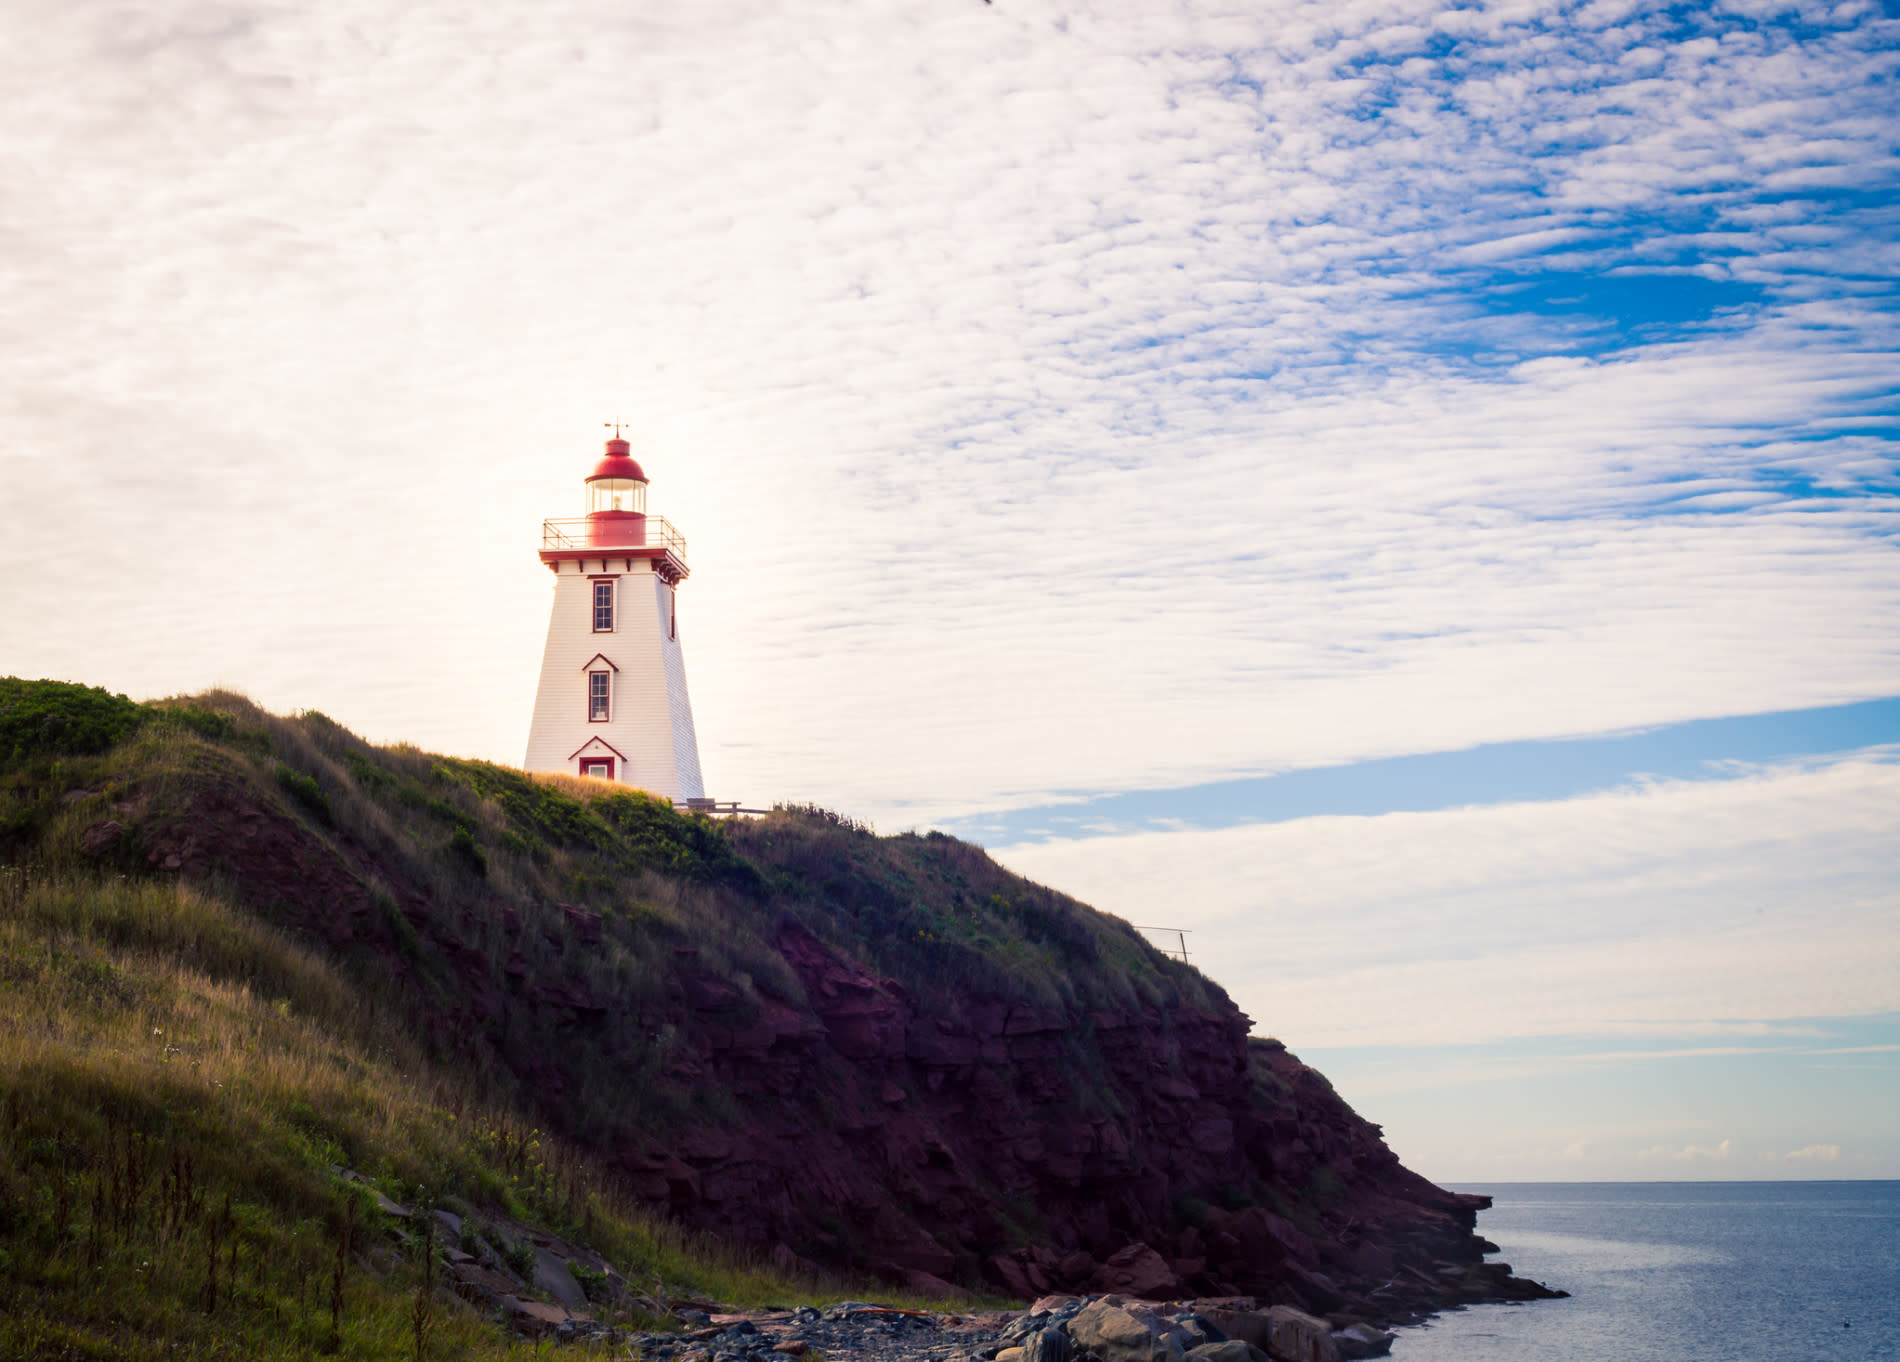 PEI lighthouse (rustyl3599. iStock / Getty Images Plus)